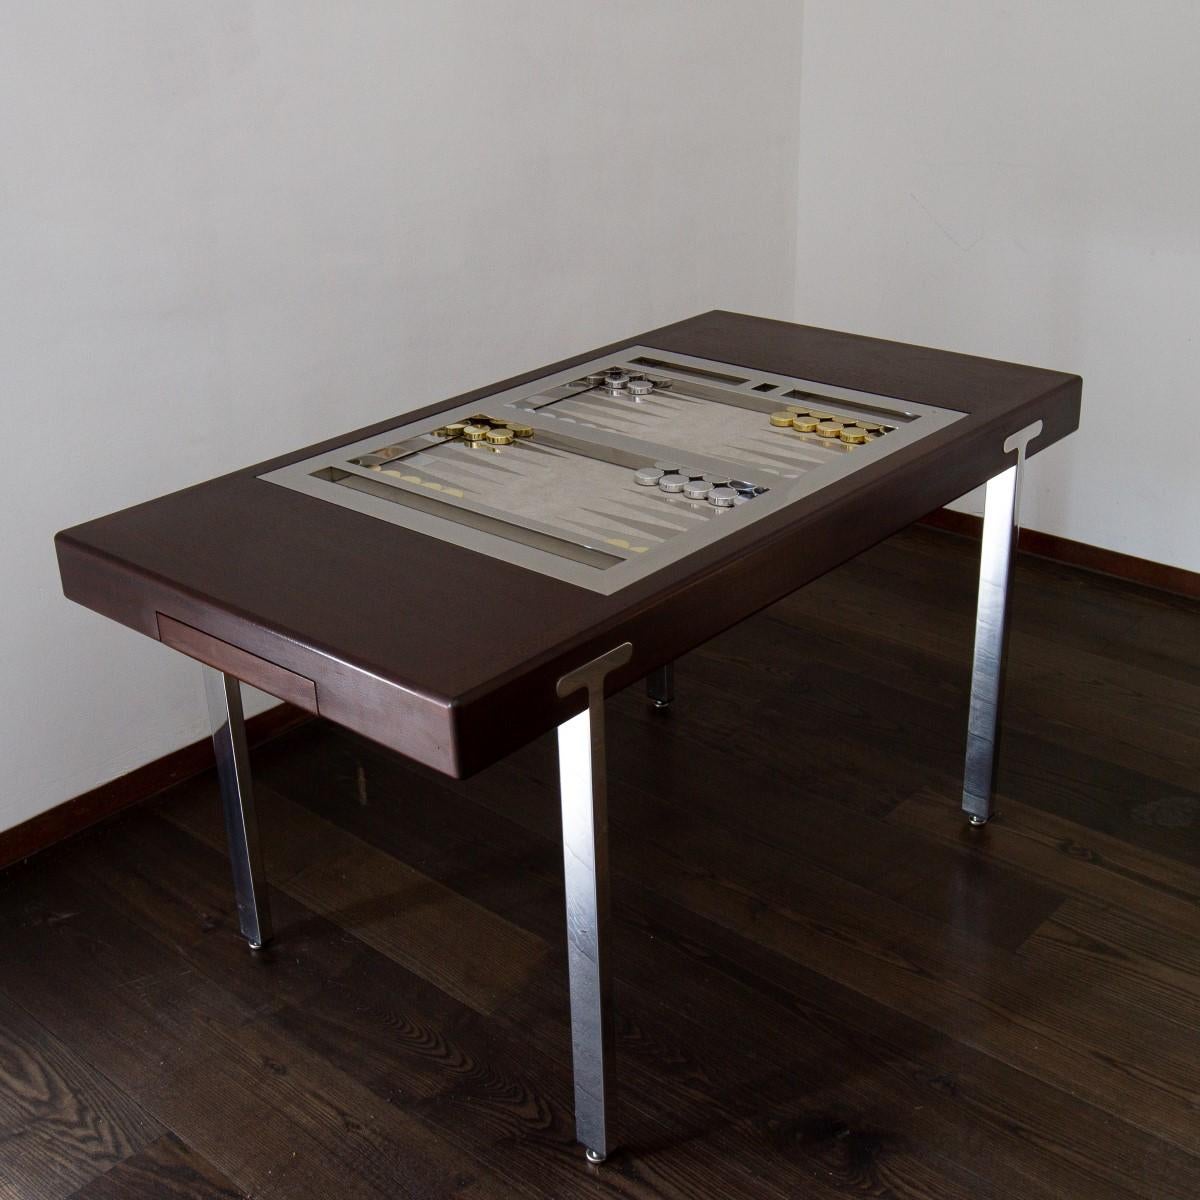 A matt brown polish and polished nickel backgammon table with a tilt top games table, complete with brass and chrome playing pieces. 

The pieces can be stored in the drawers which also act as the hold and release mechanism for the table top,